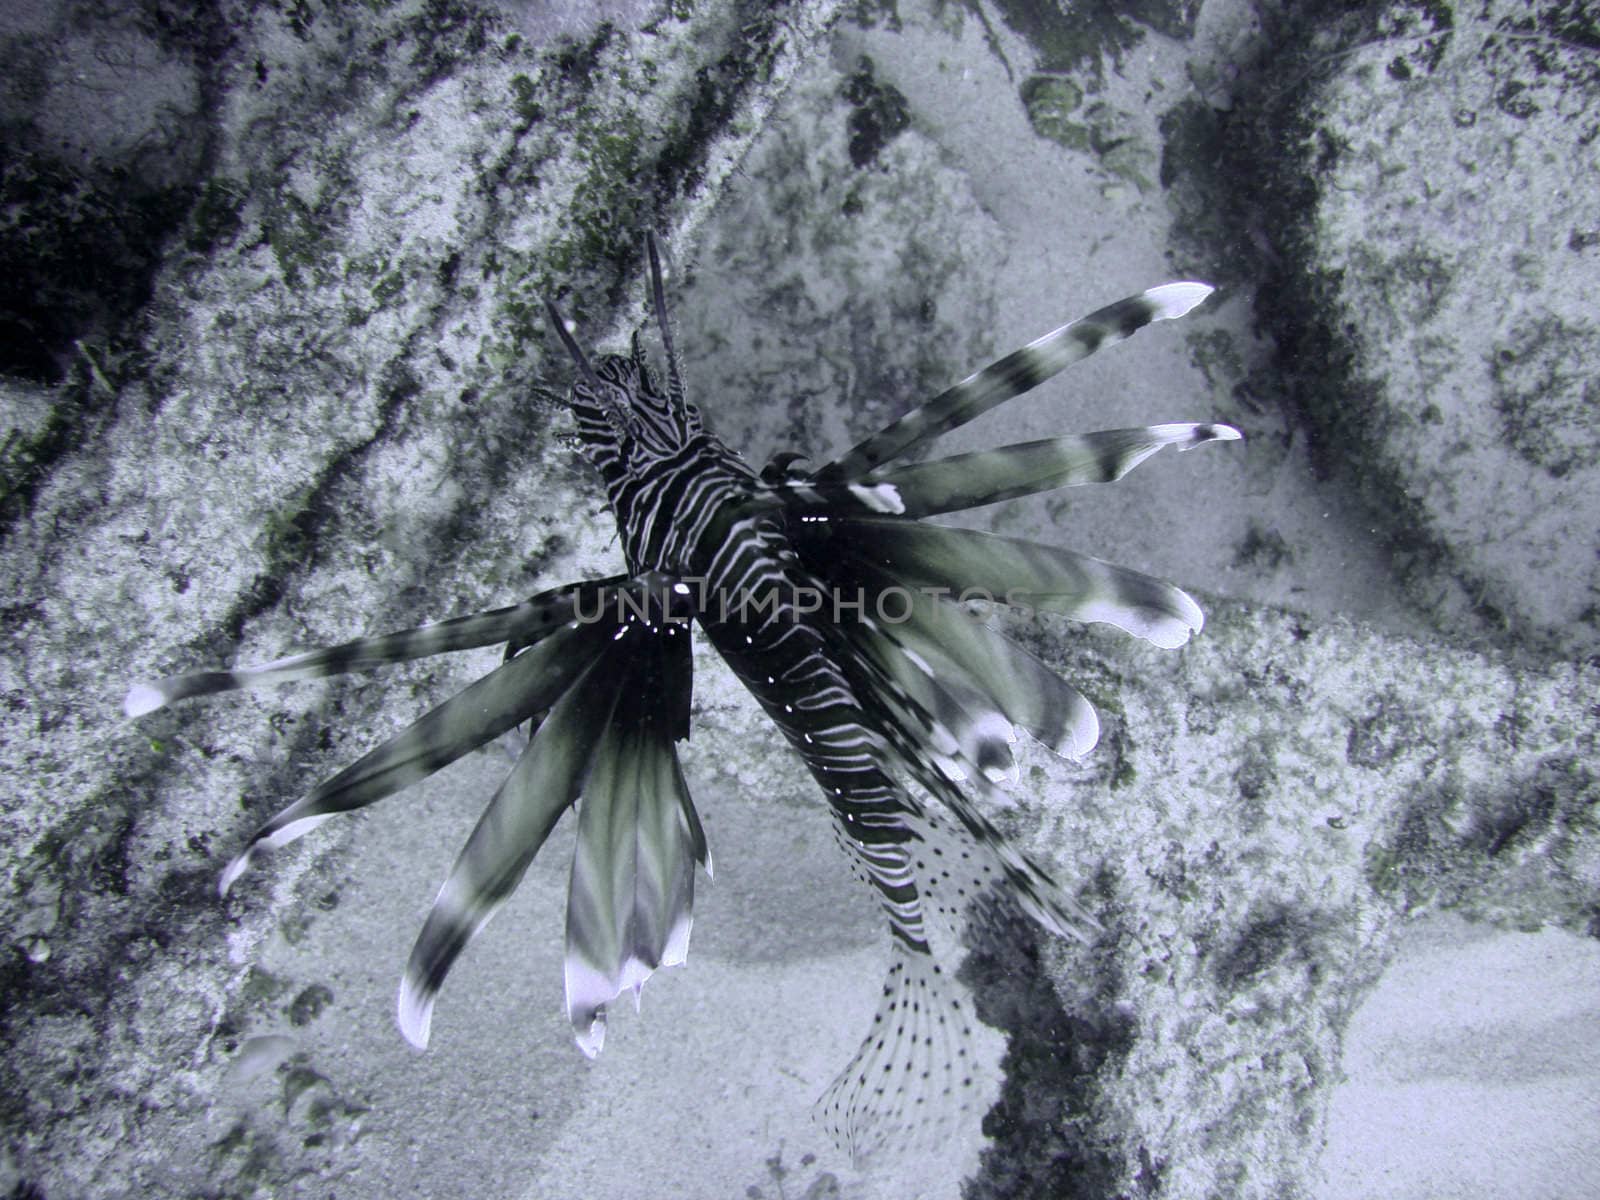 Lionfish / Devil firefish by ChrisAlleaume